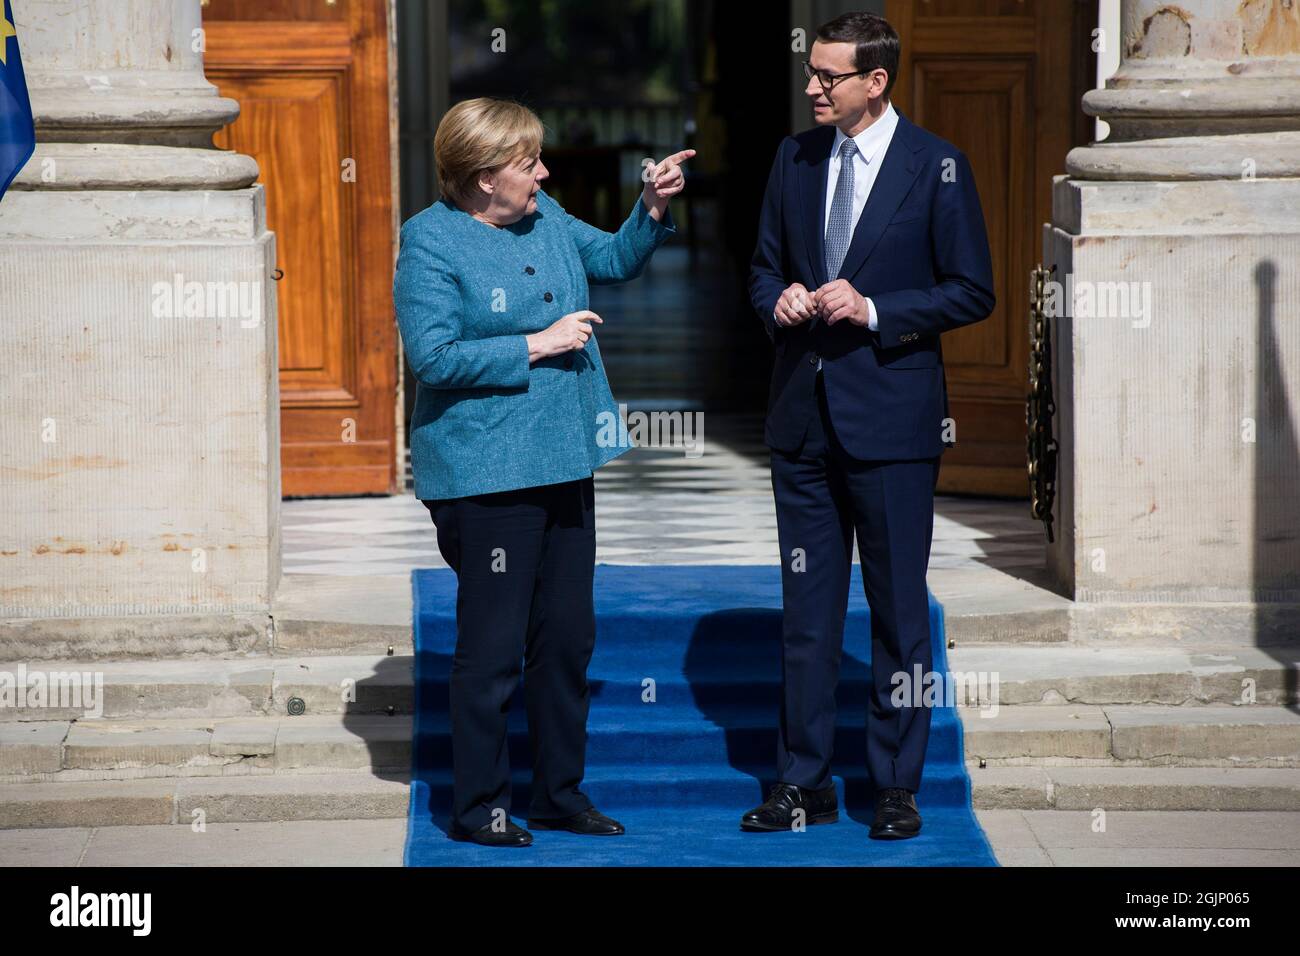 Warsaw, Poland. 11th Sep, 2021. Angela Merkel and Mateusz Morawiecki seen during a meeting at the Palace on the Isle (Pa?ac na Wyspie) in Warsaw.German chancellor Angela Merkel is visiting Warsaw for a last before retiring from politics. Mrs. Merkel was welcomed by Polish Prime Minister Mateusz Morawiecki. Credit: SOPA Images Limited/Alamy Live News Stock Photo